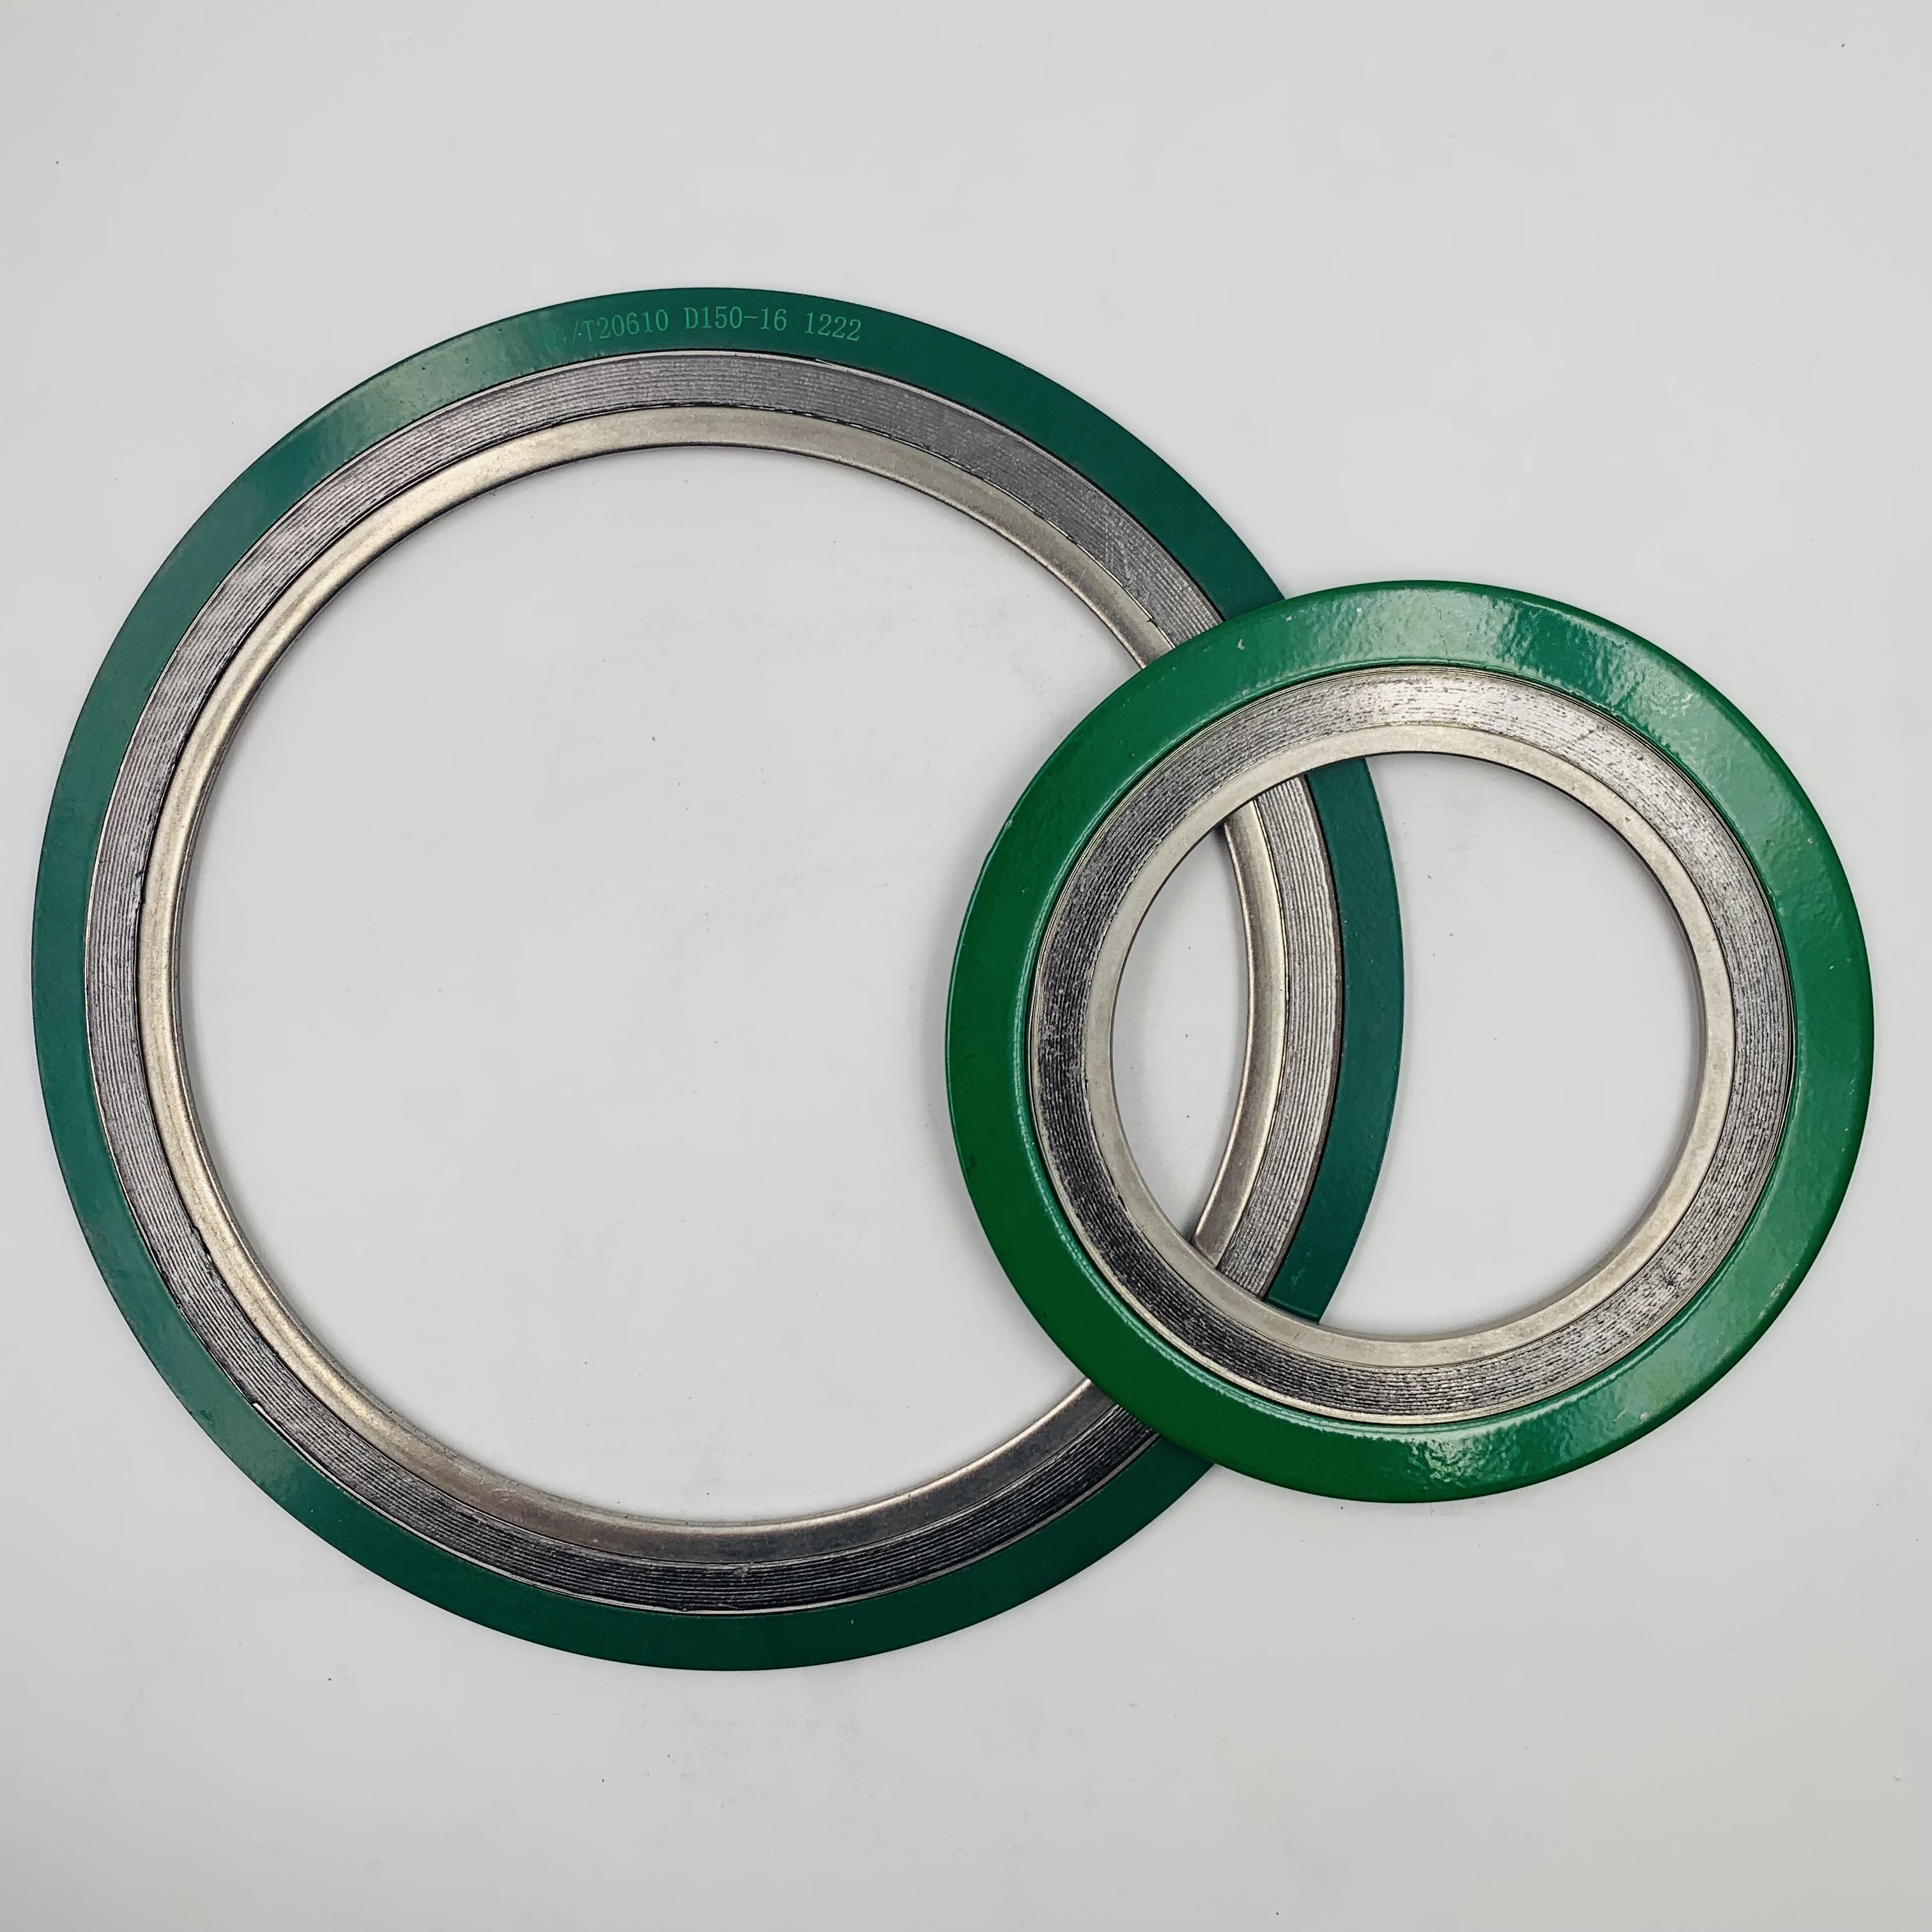 The role of Spiral Wound Gasket ?